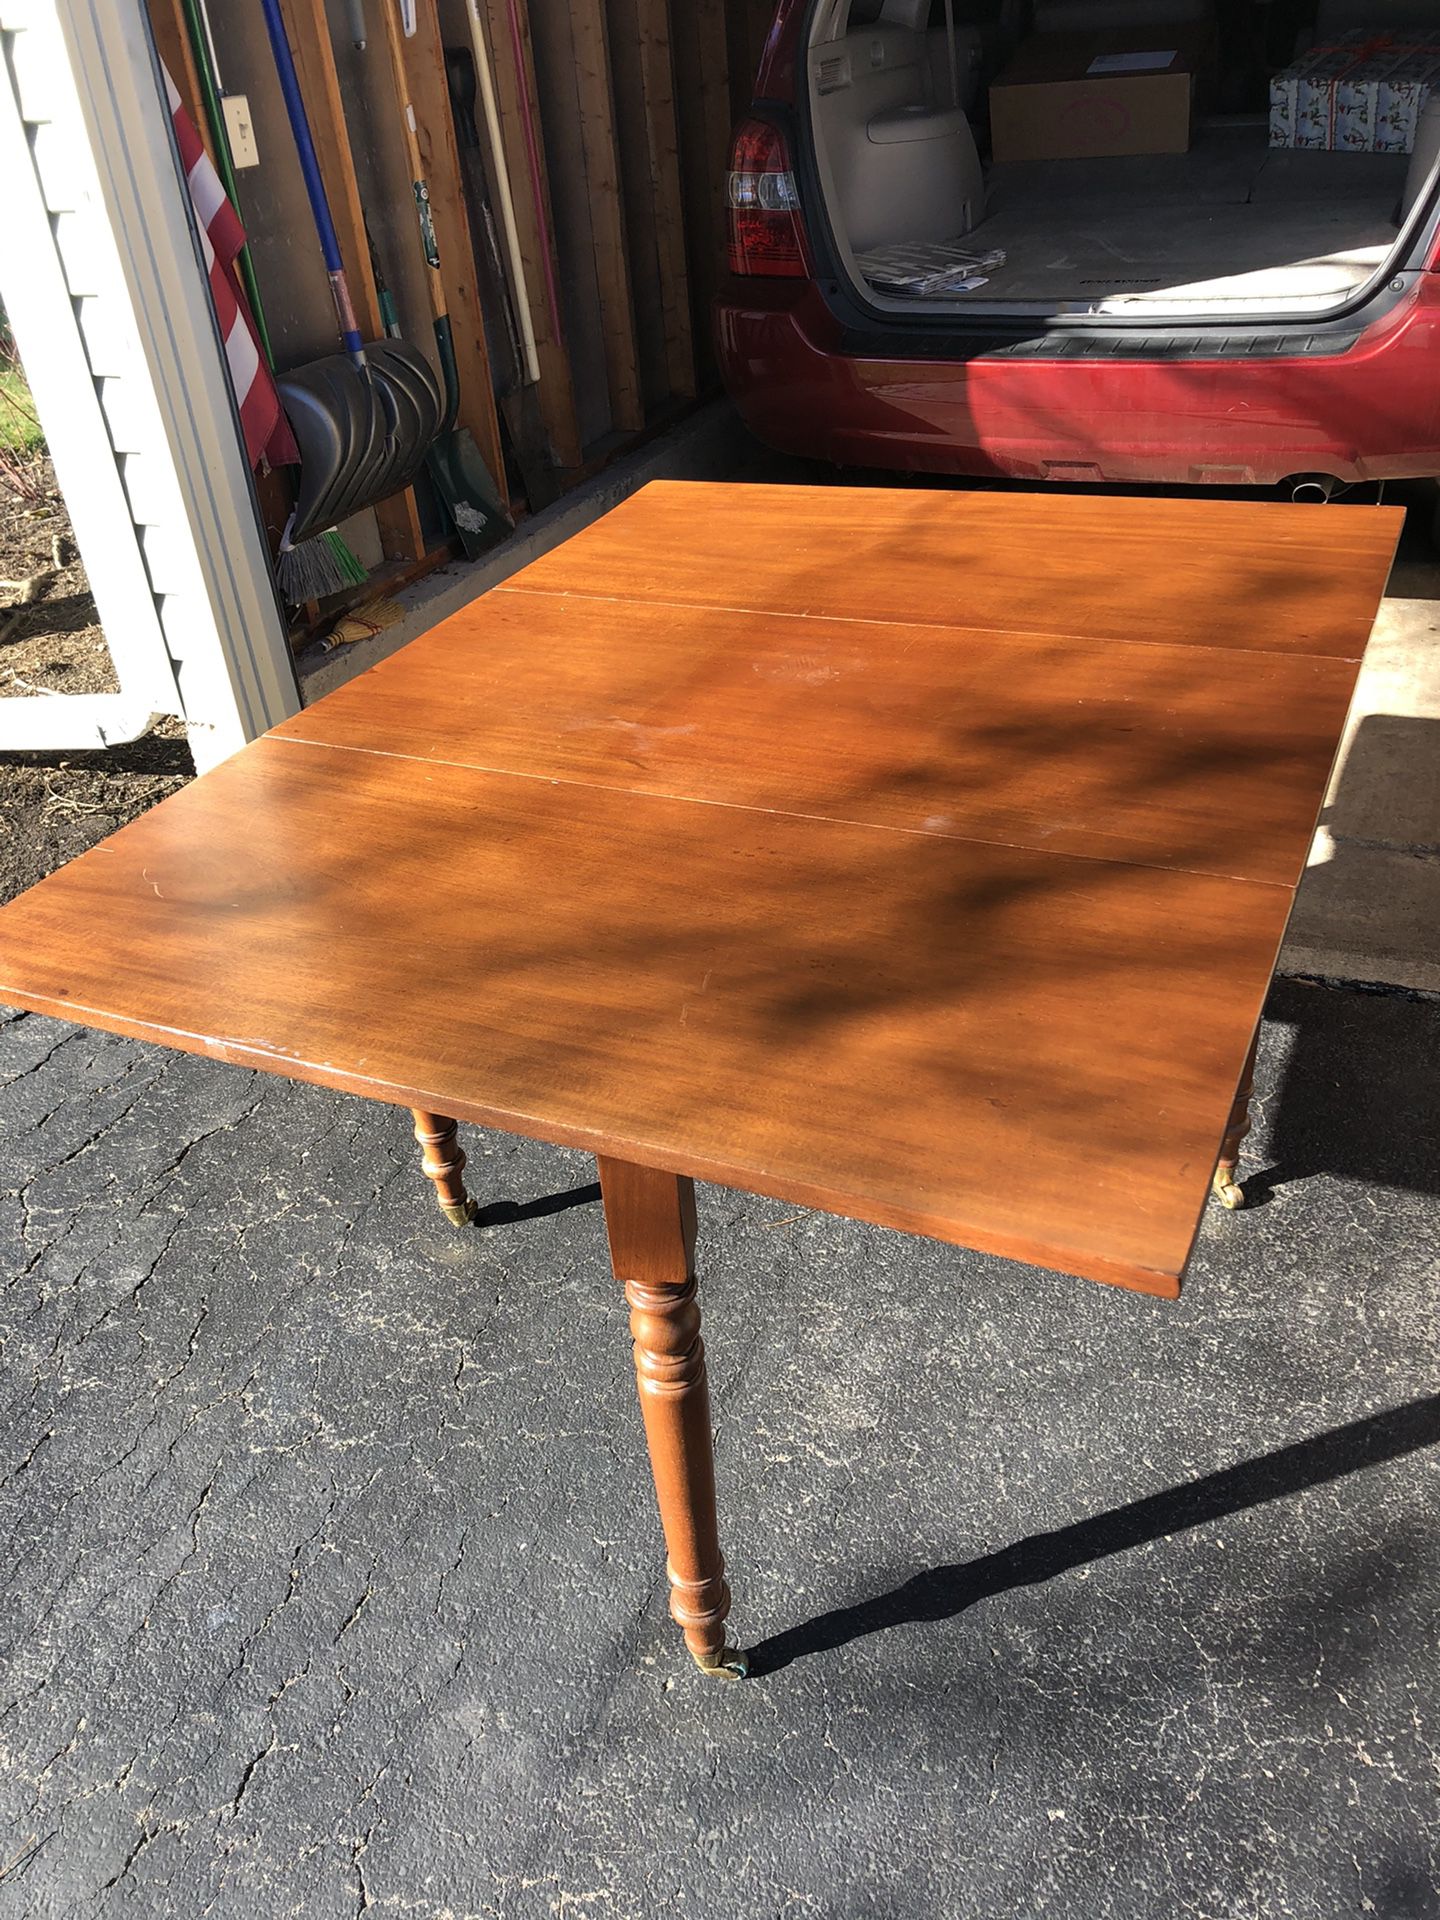 Dining room table 42 inch wide by 56 inch long, both ends fold down